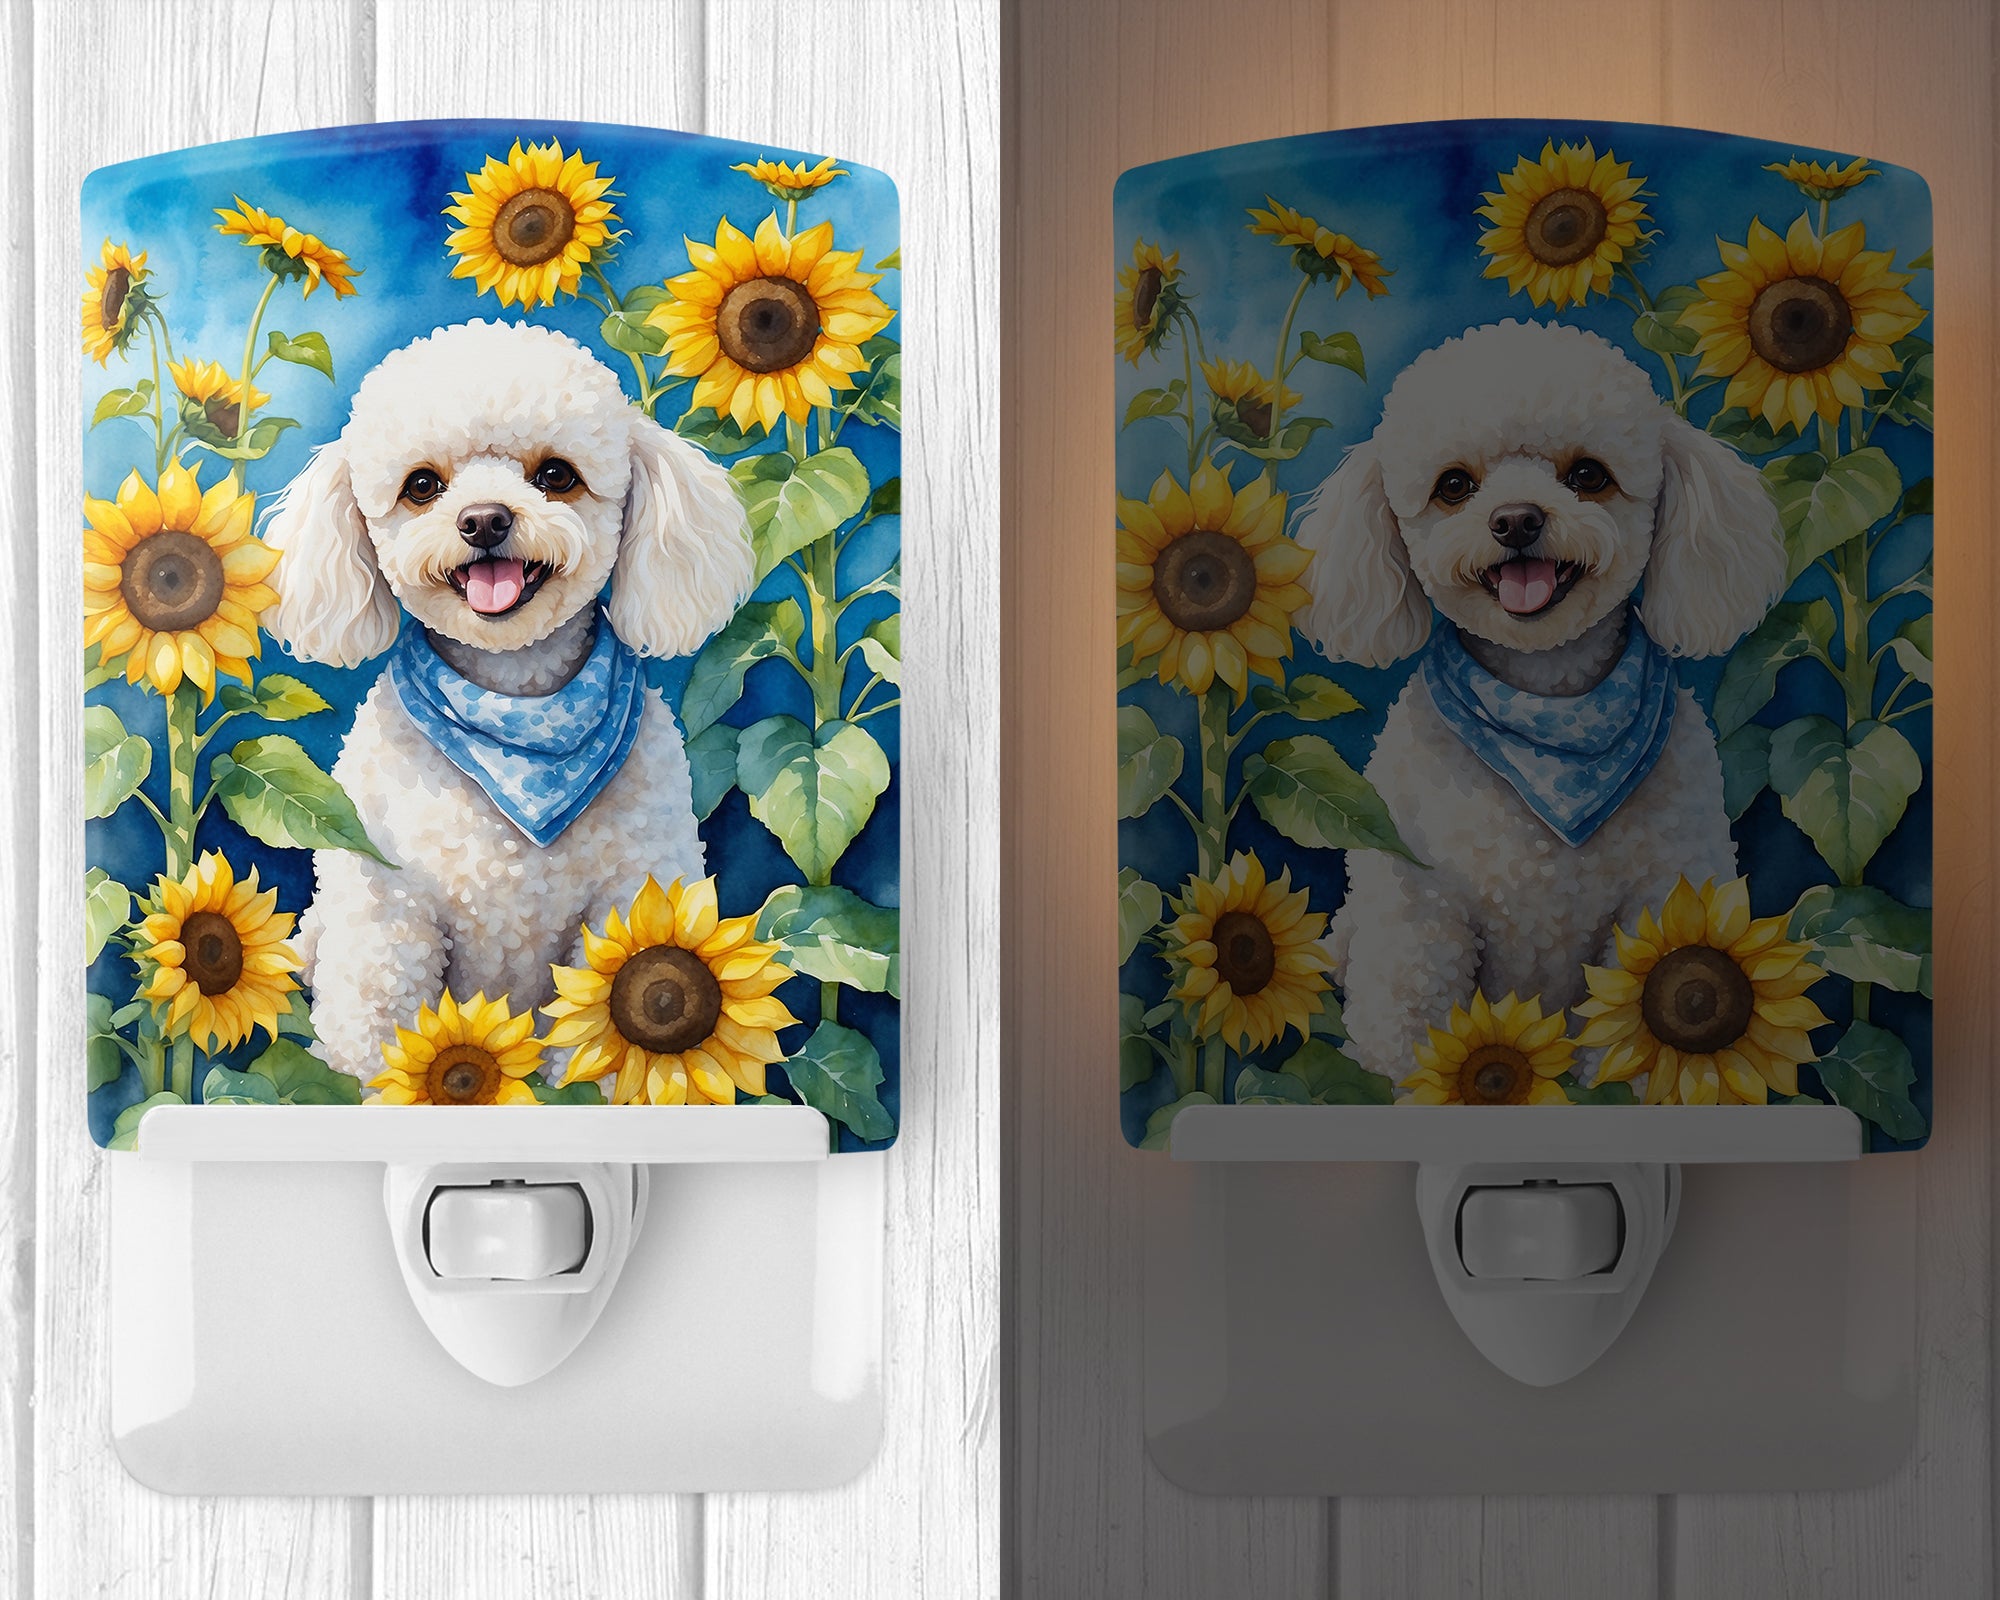 White Poodle in Sunflowers Ceramic Night Light